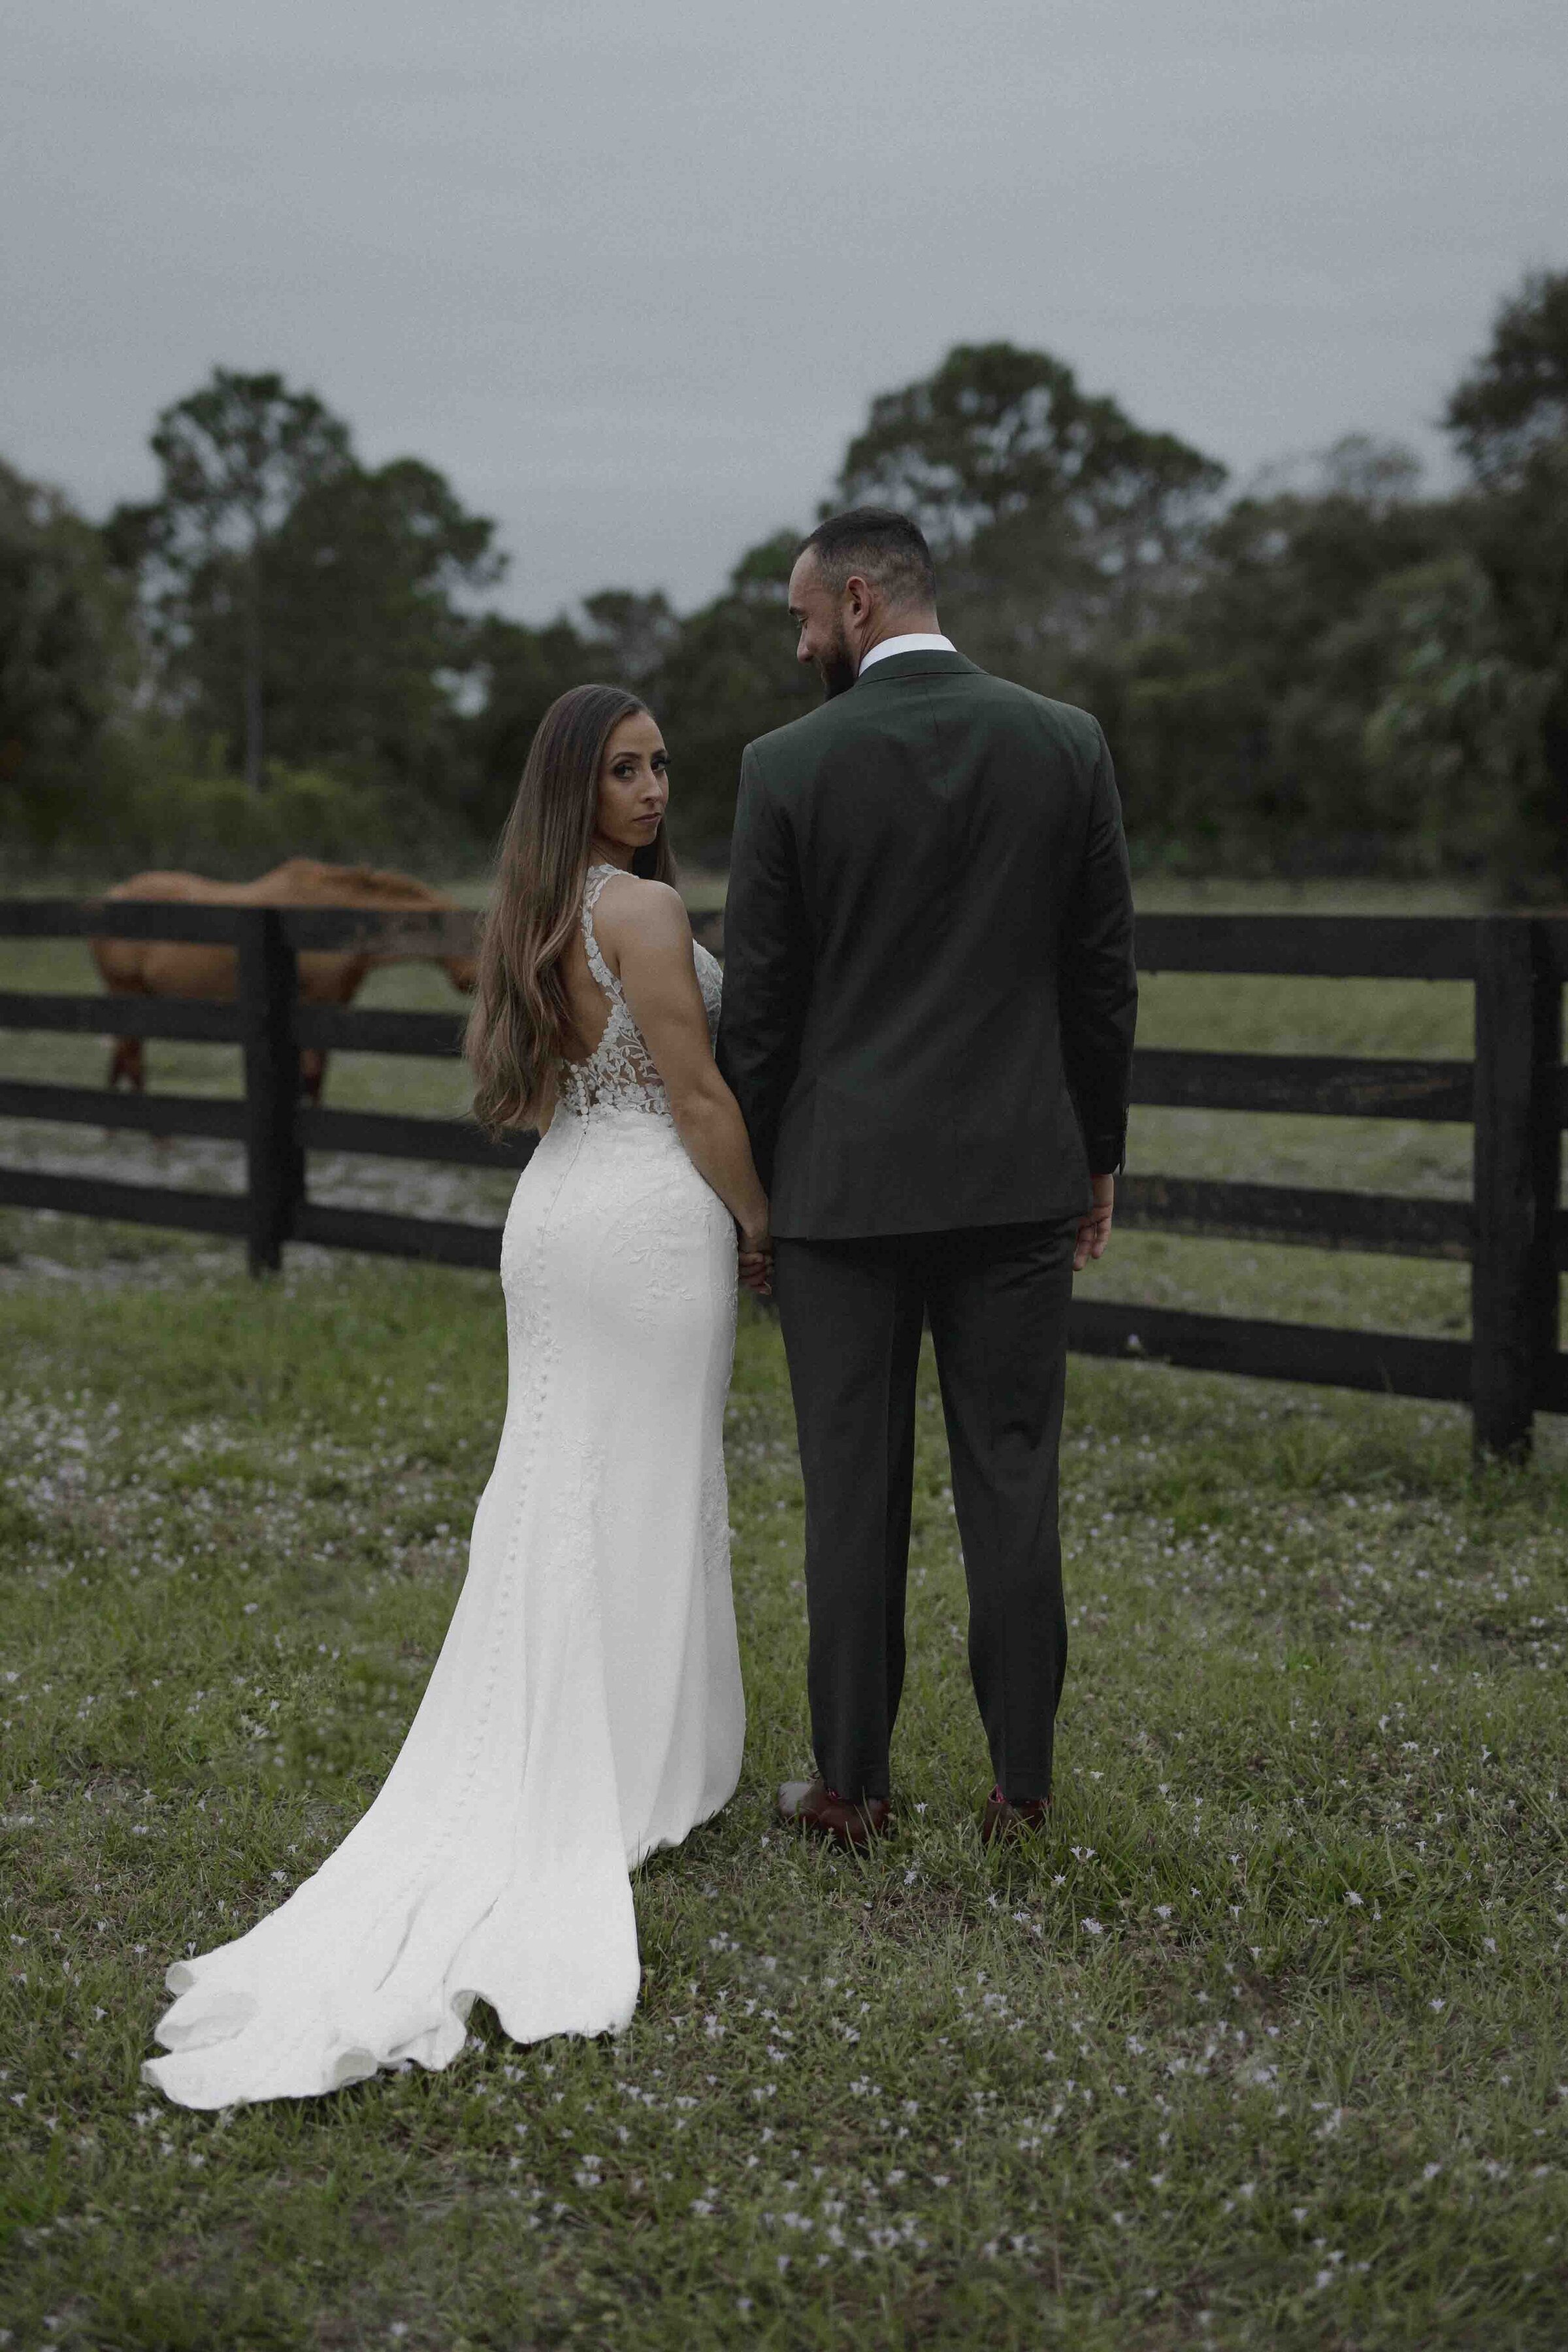 Bride and groom standing in a field with a horse